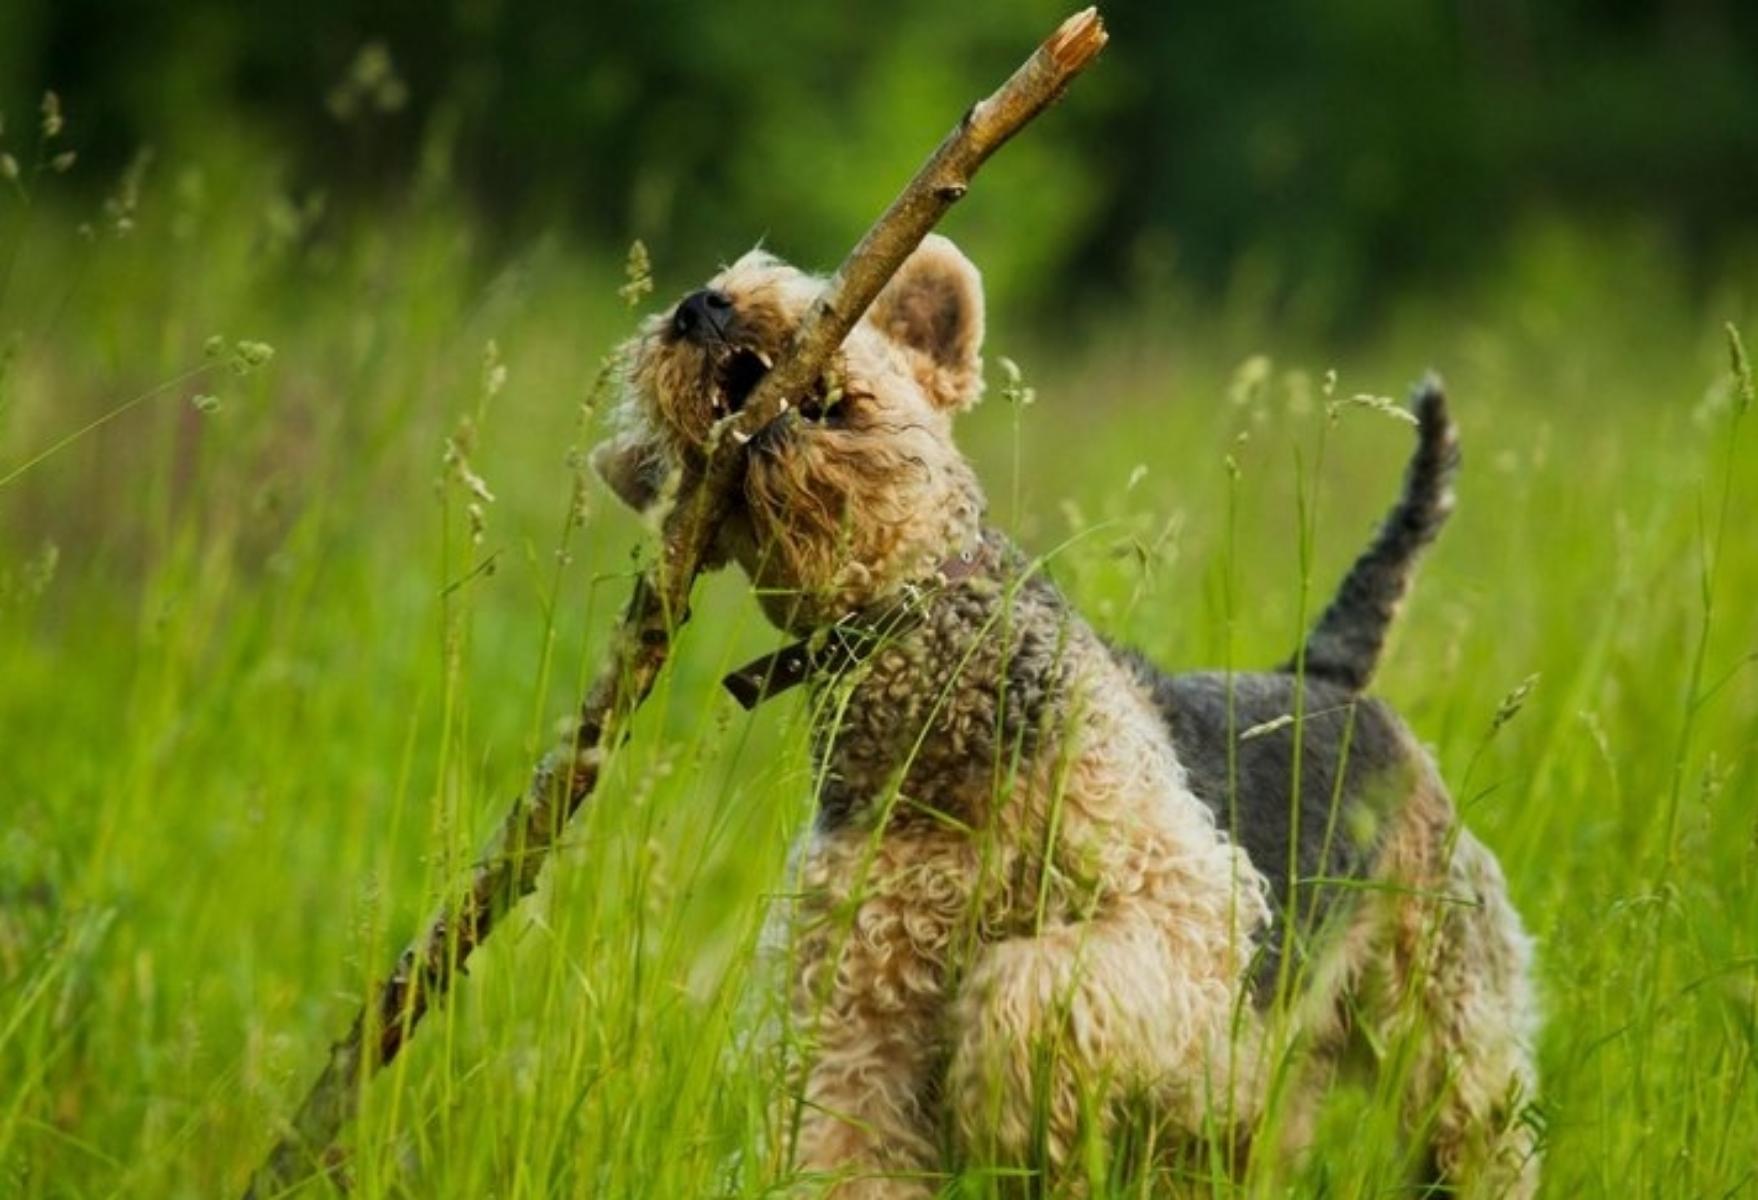 10. Airedale Terrier